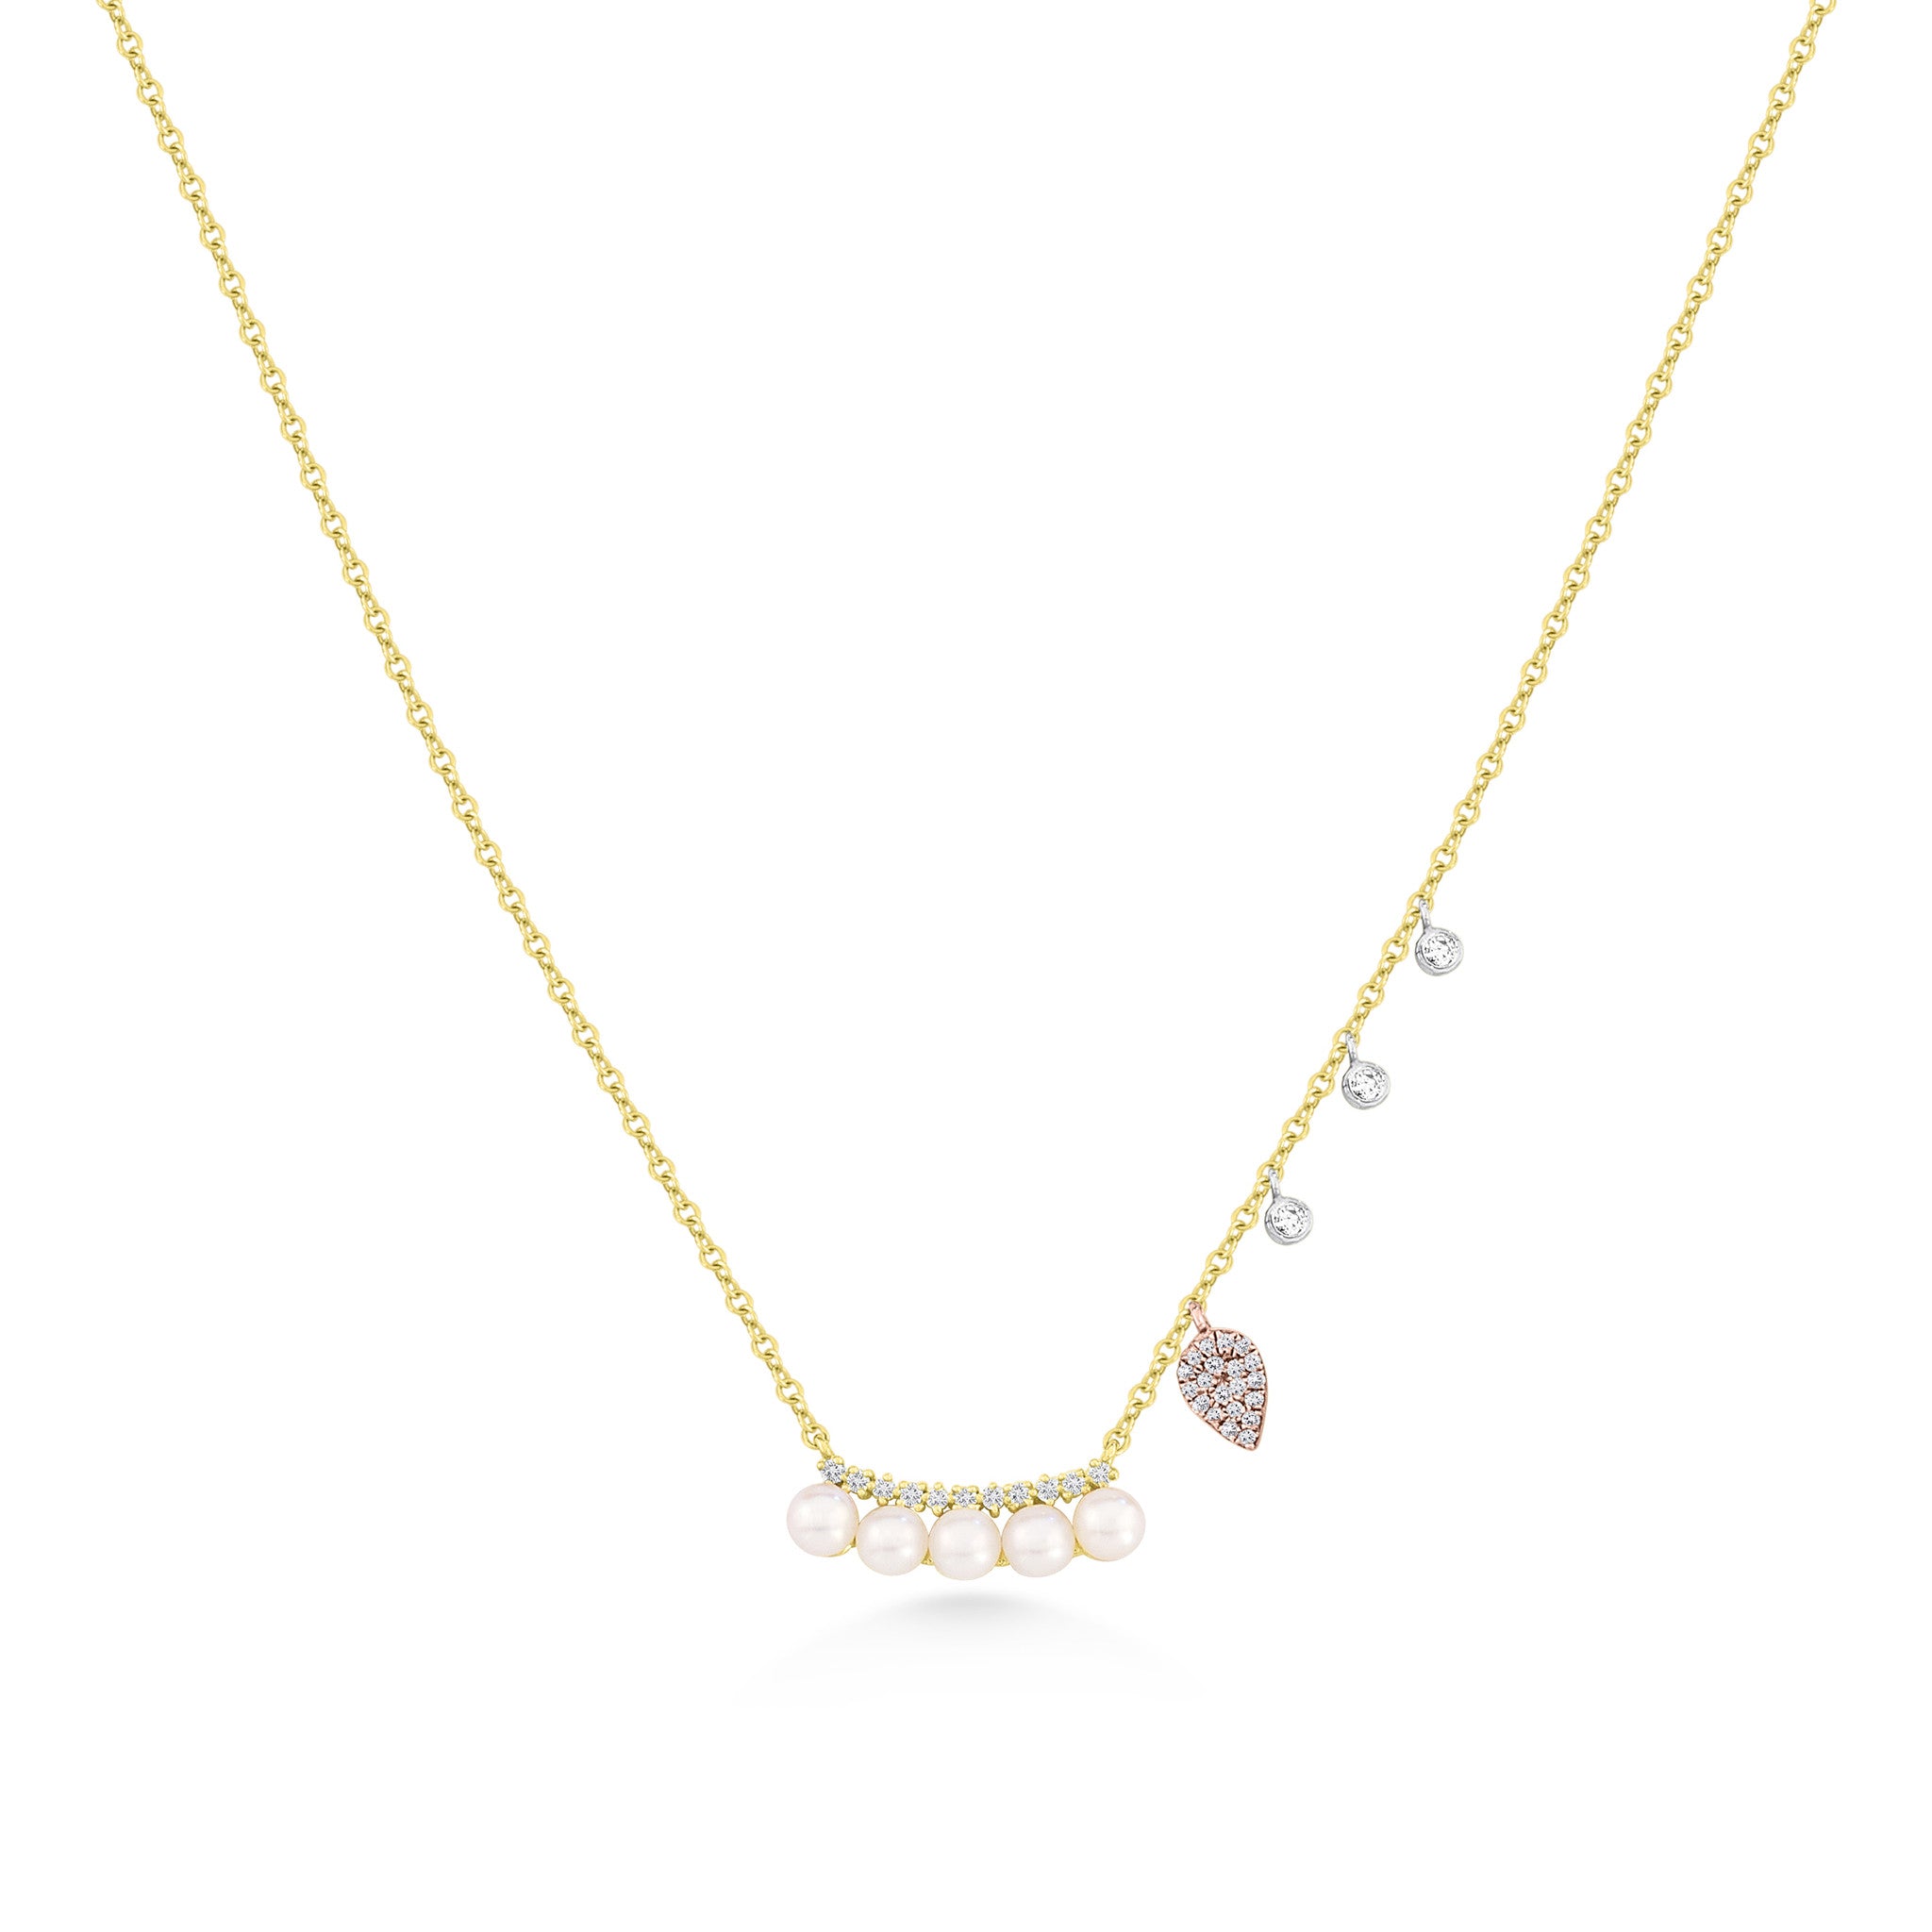 Meira T 14k Yellow Gold Pearl Necklace with Rose Gold Charms and Diamond Bezels